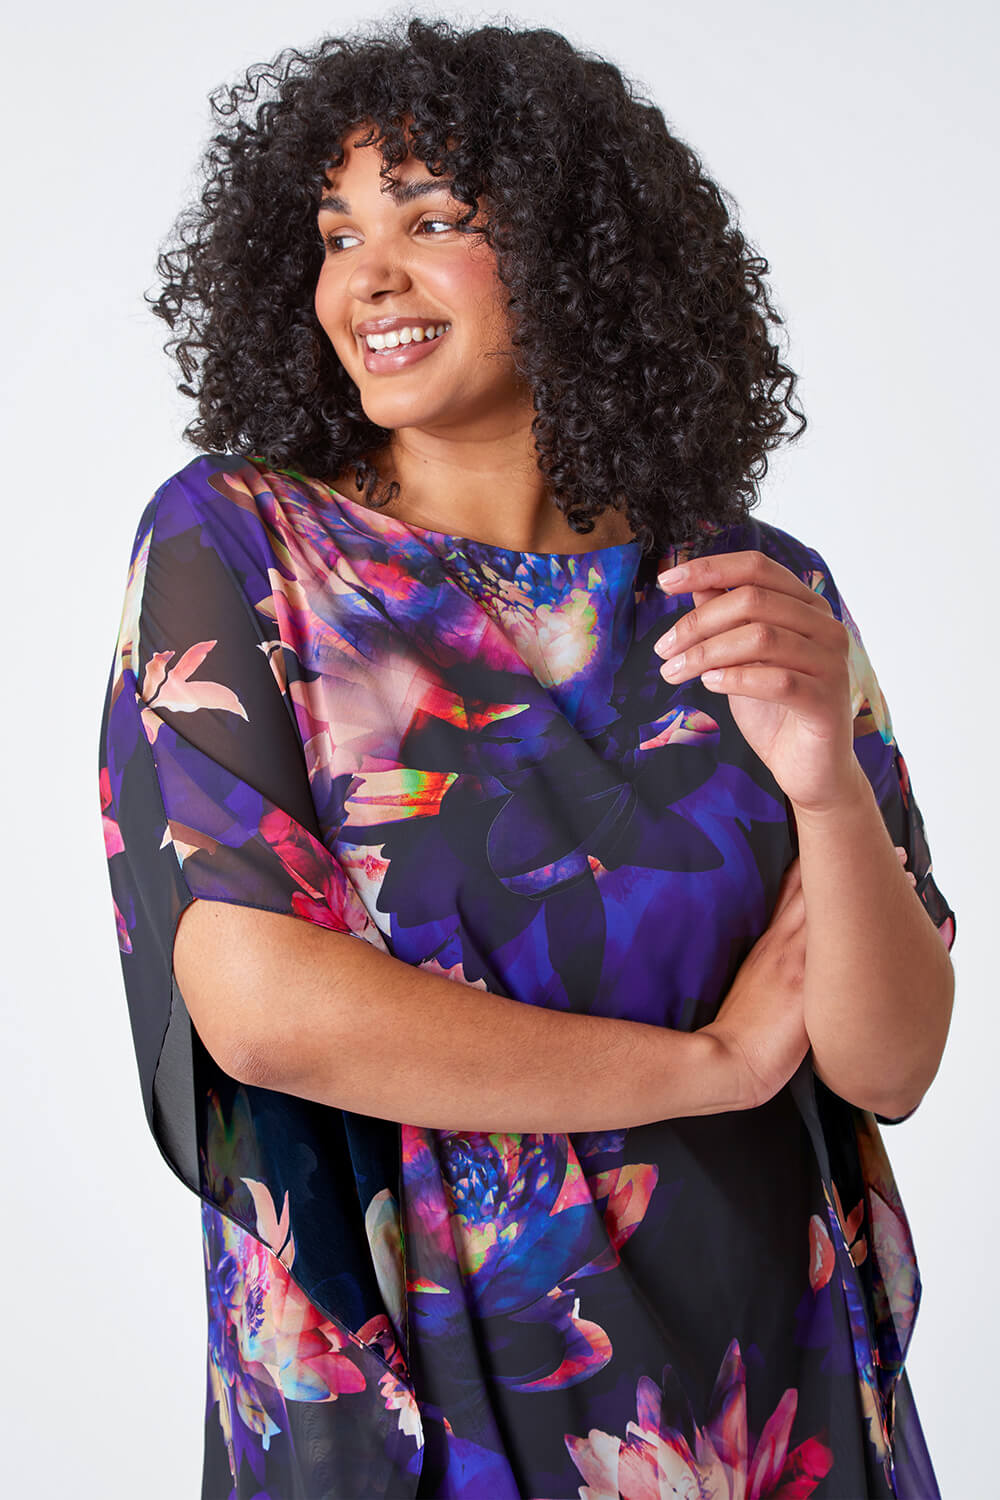 Black Curve Floral Print Chiffon Overlay Top, Image 4 of 5